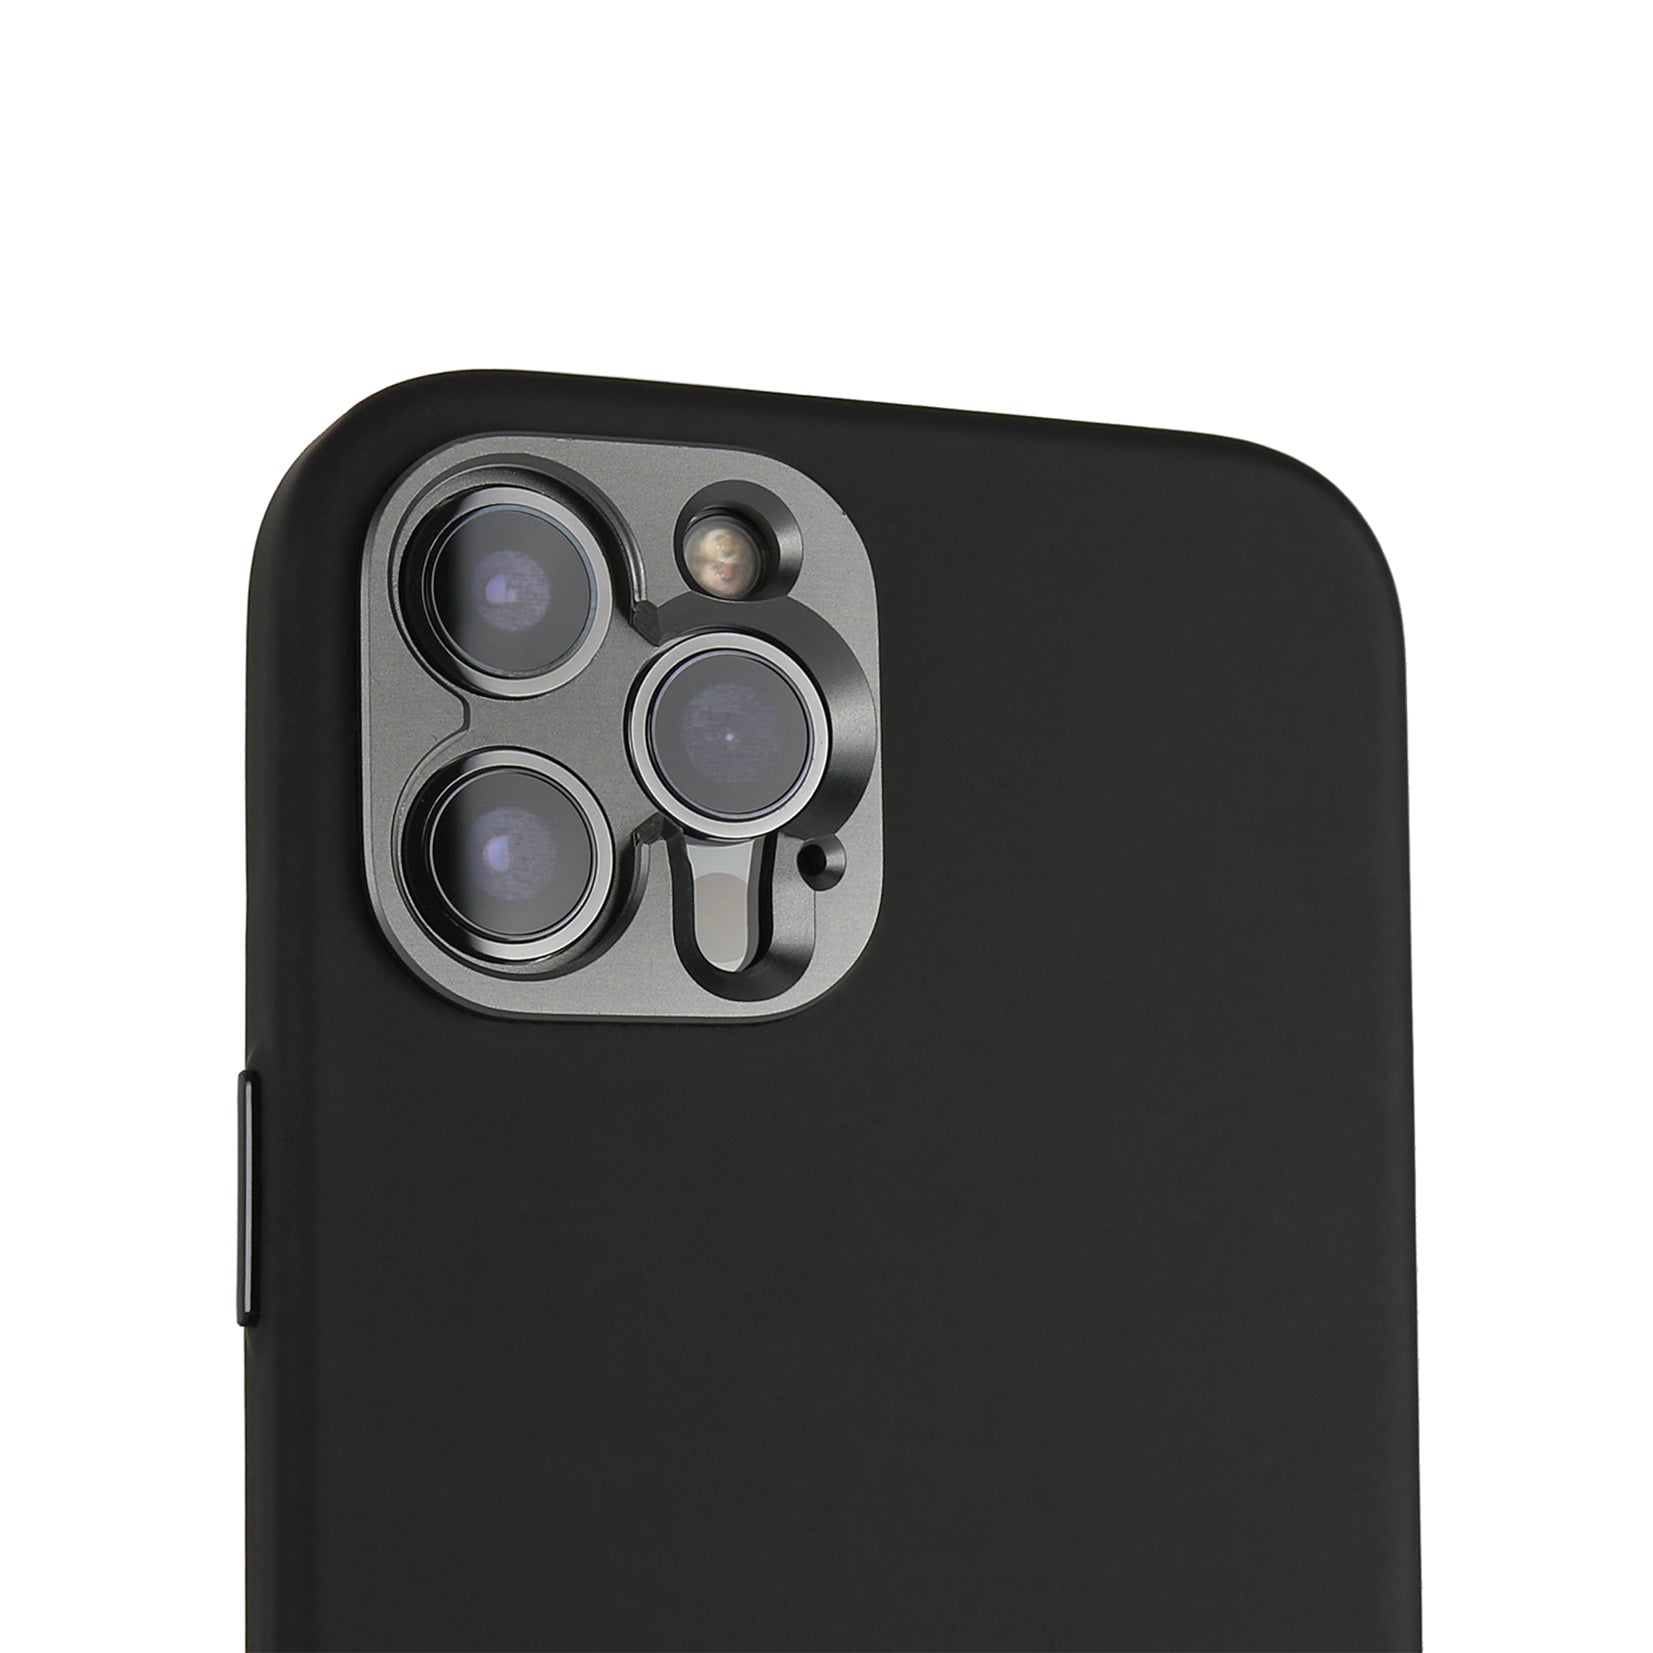 Pro Case - iPhone 13 Pro Max (Magnet Enabled)